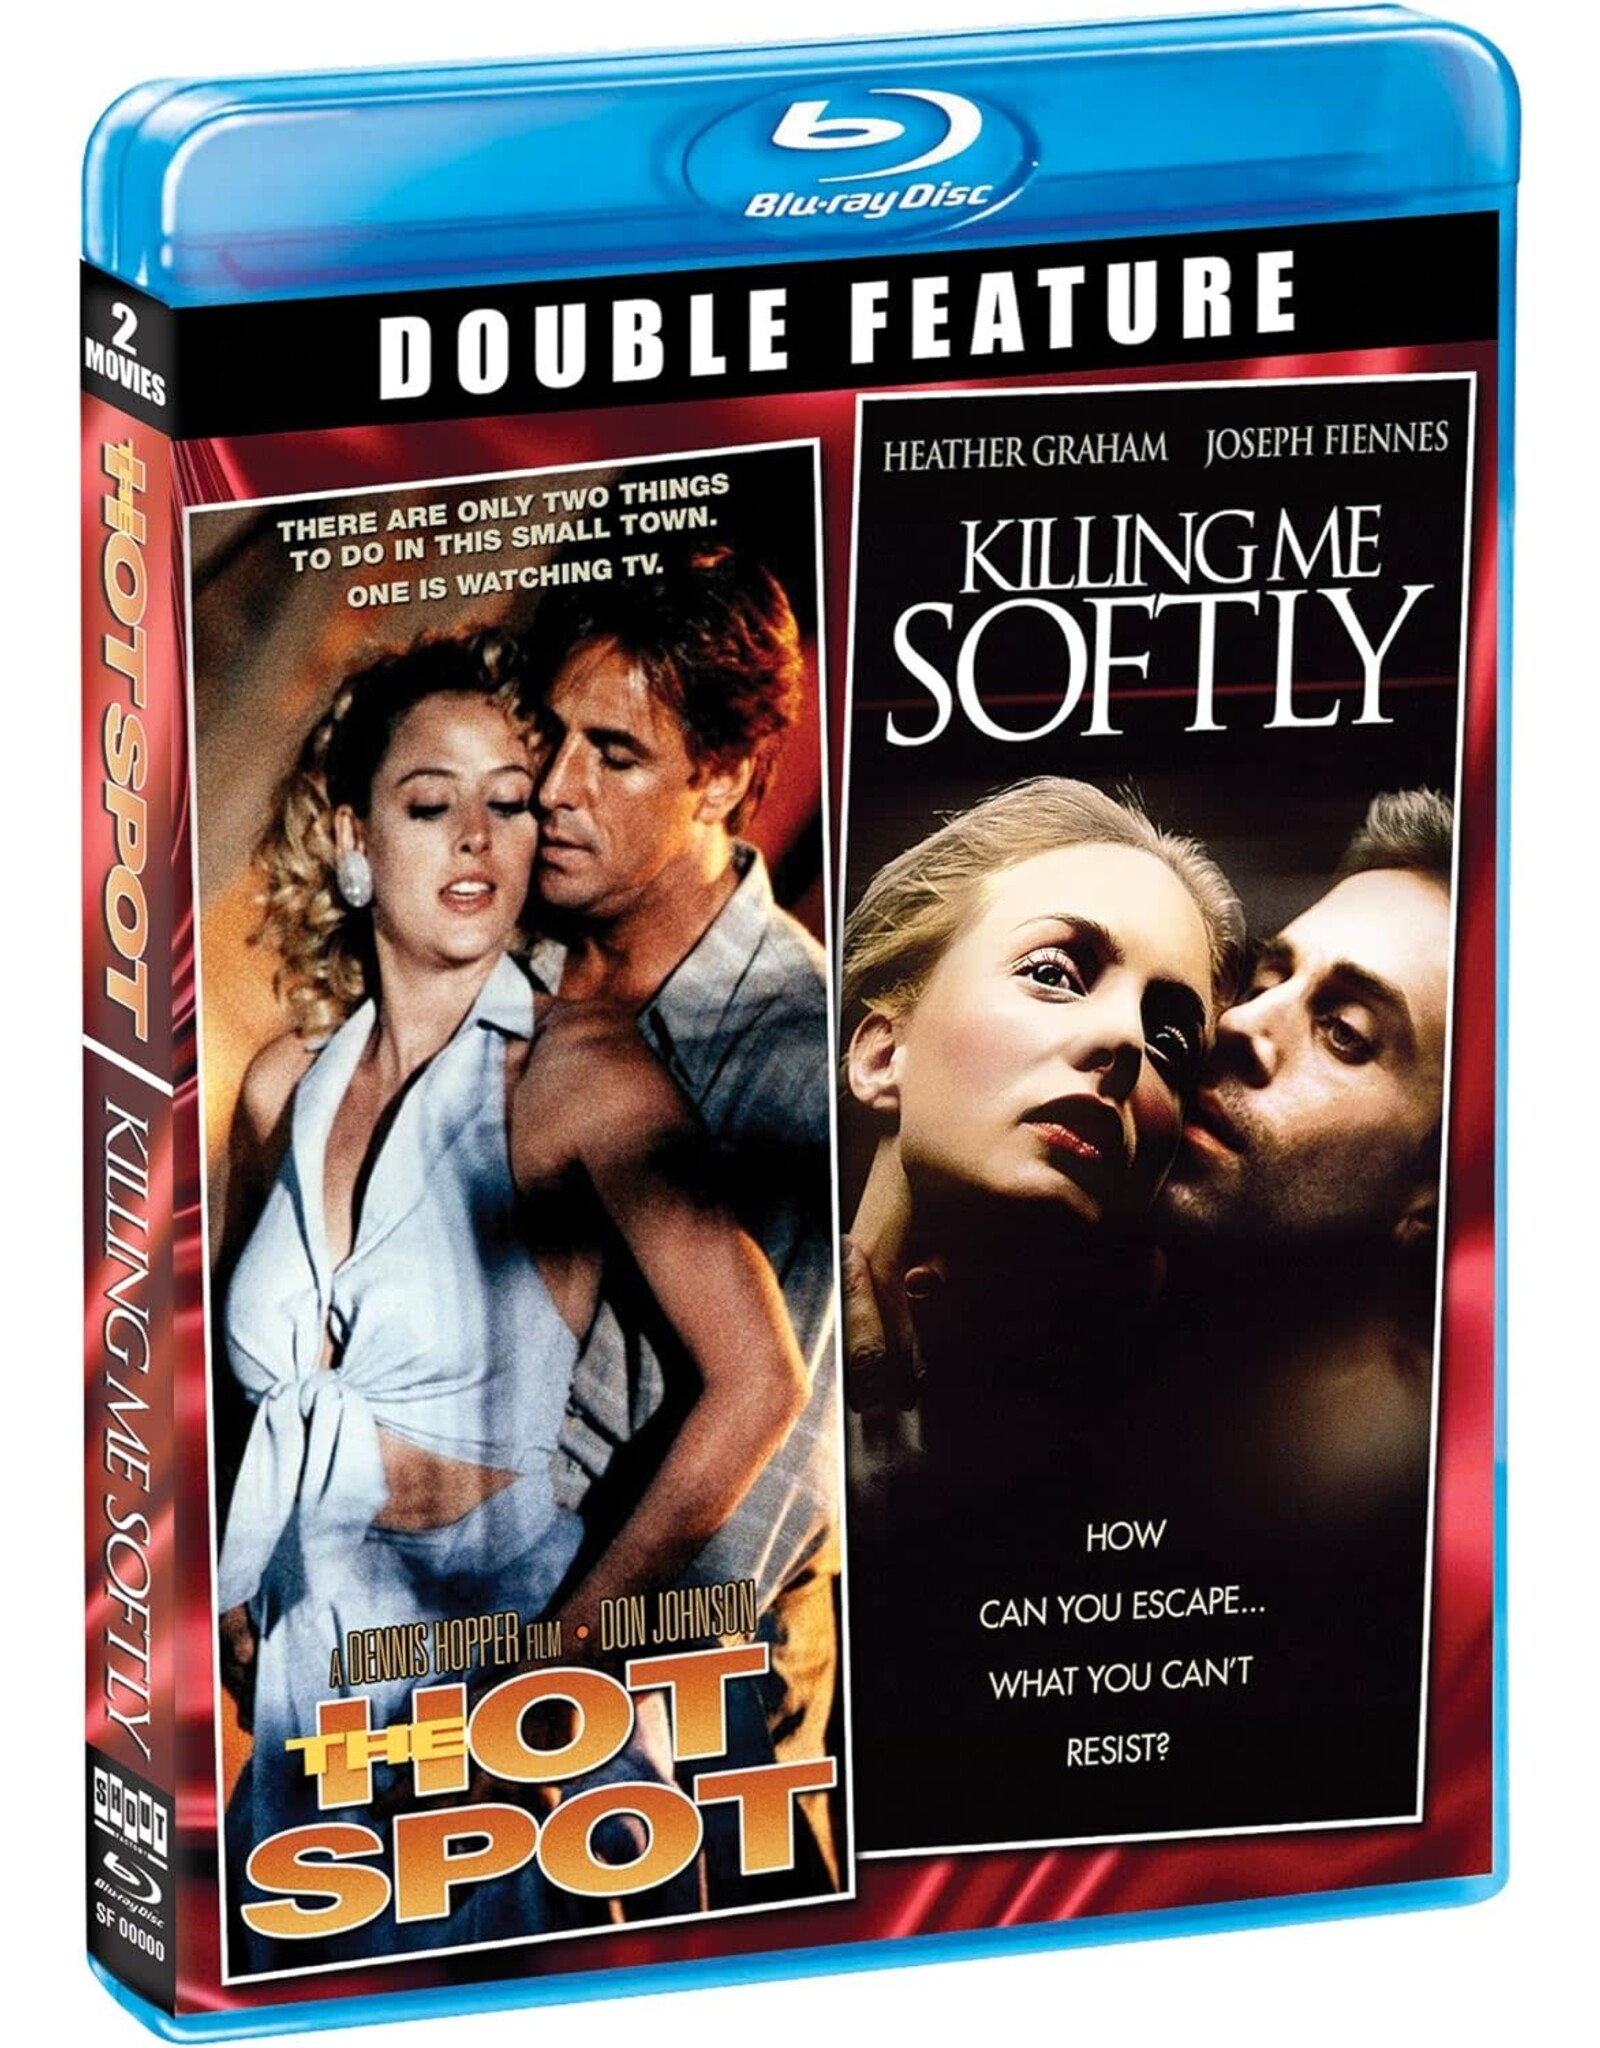 Cult & Cool Hot Spot, The / Killing Me Softly Double Feature - Shout Factory (Used)